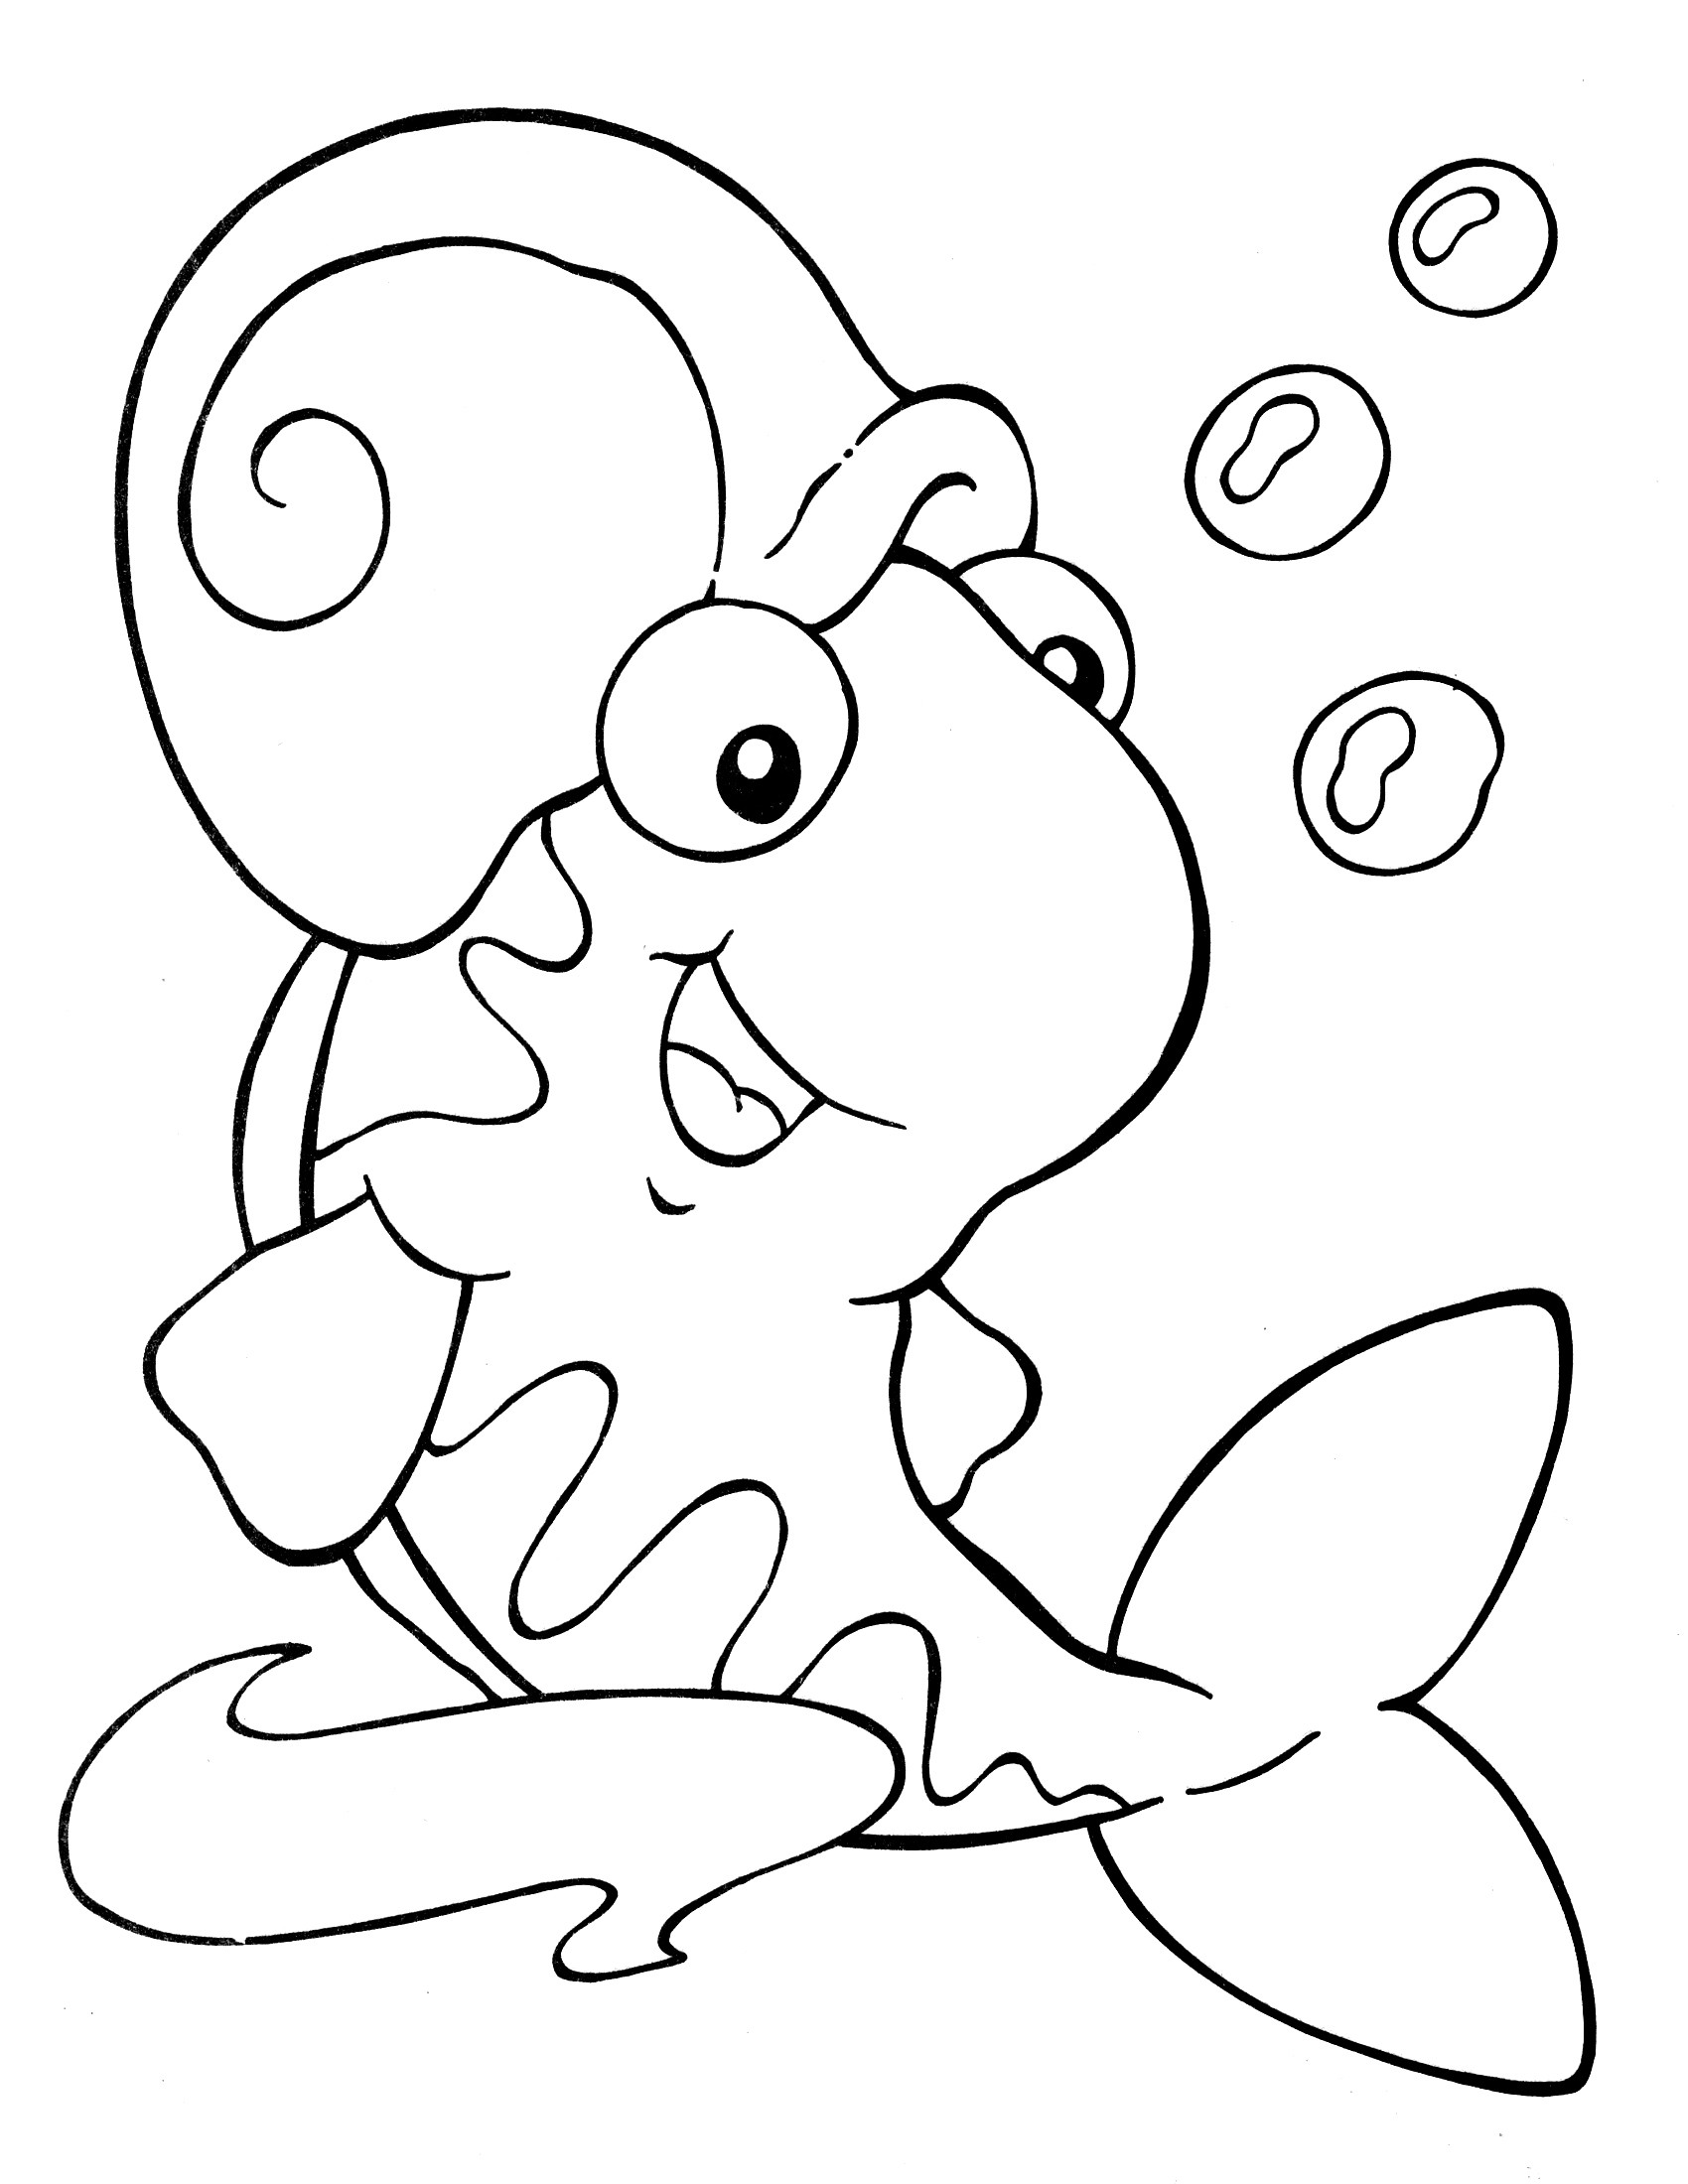 Crayola Coloring Pages For Girls
 45 Artistic Crayola Coloring Pages